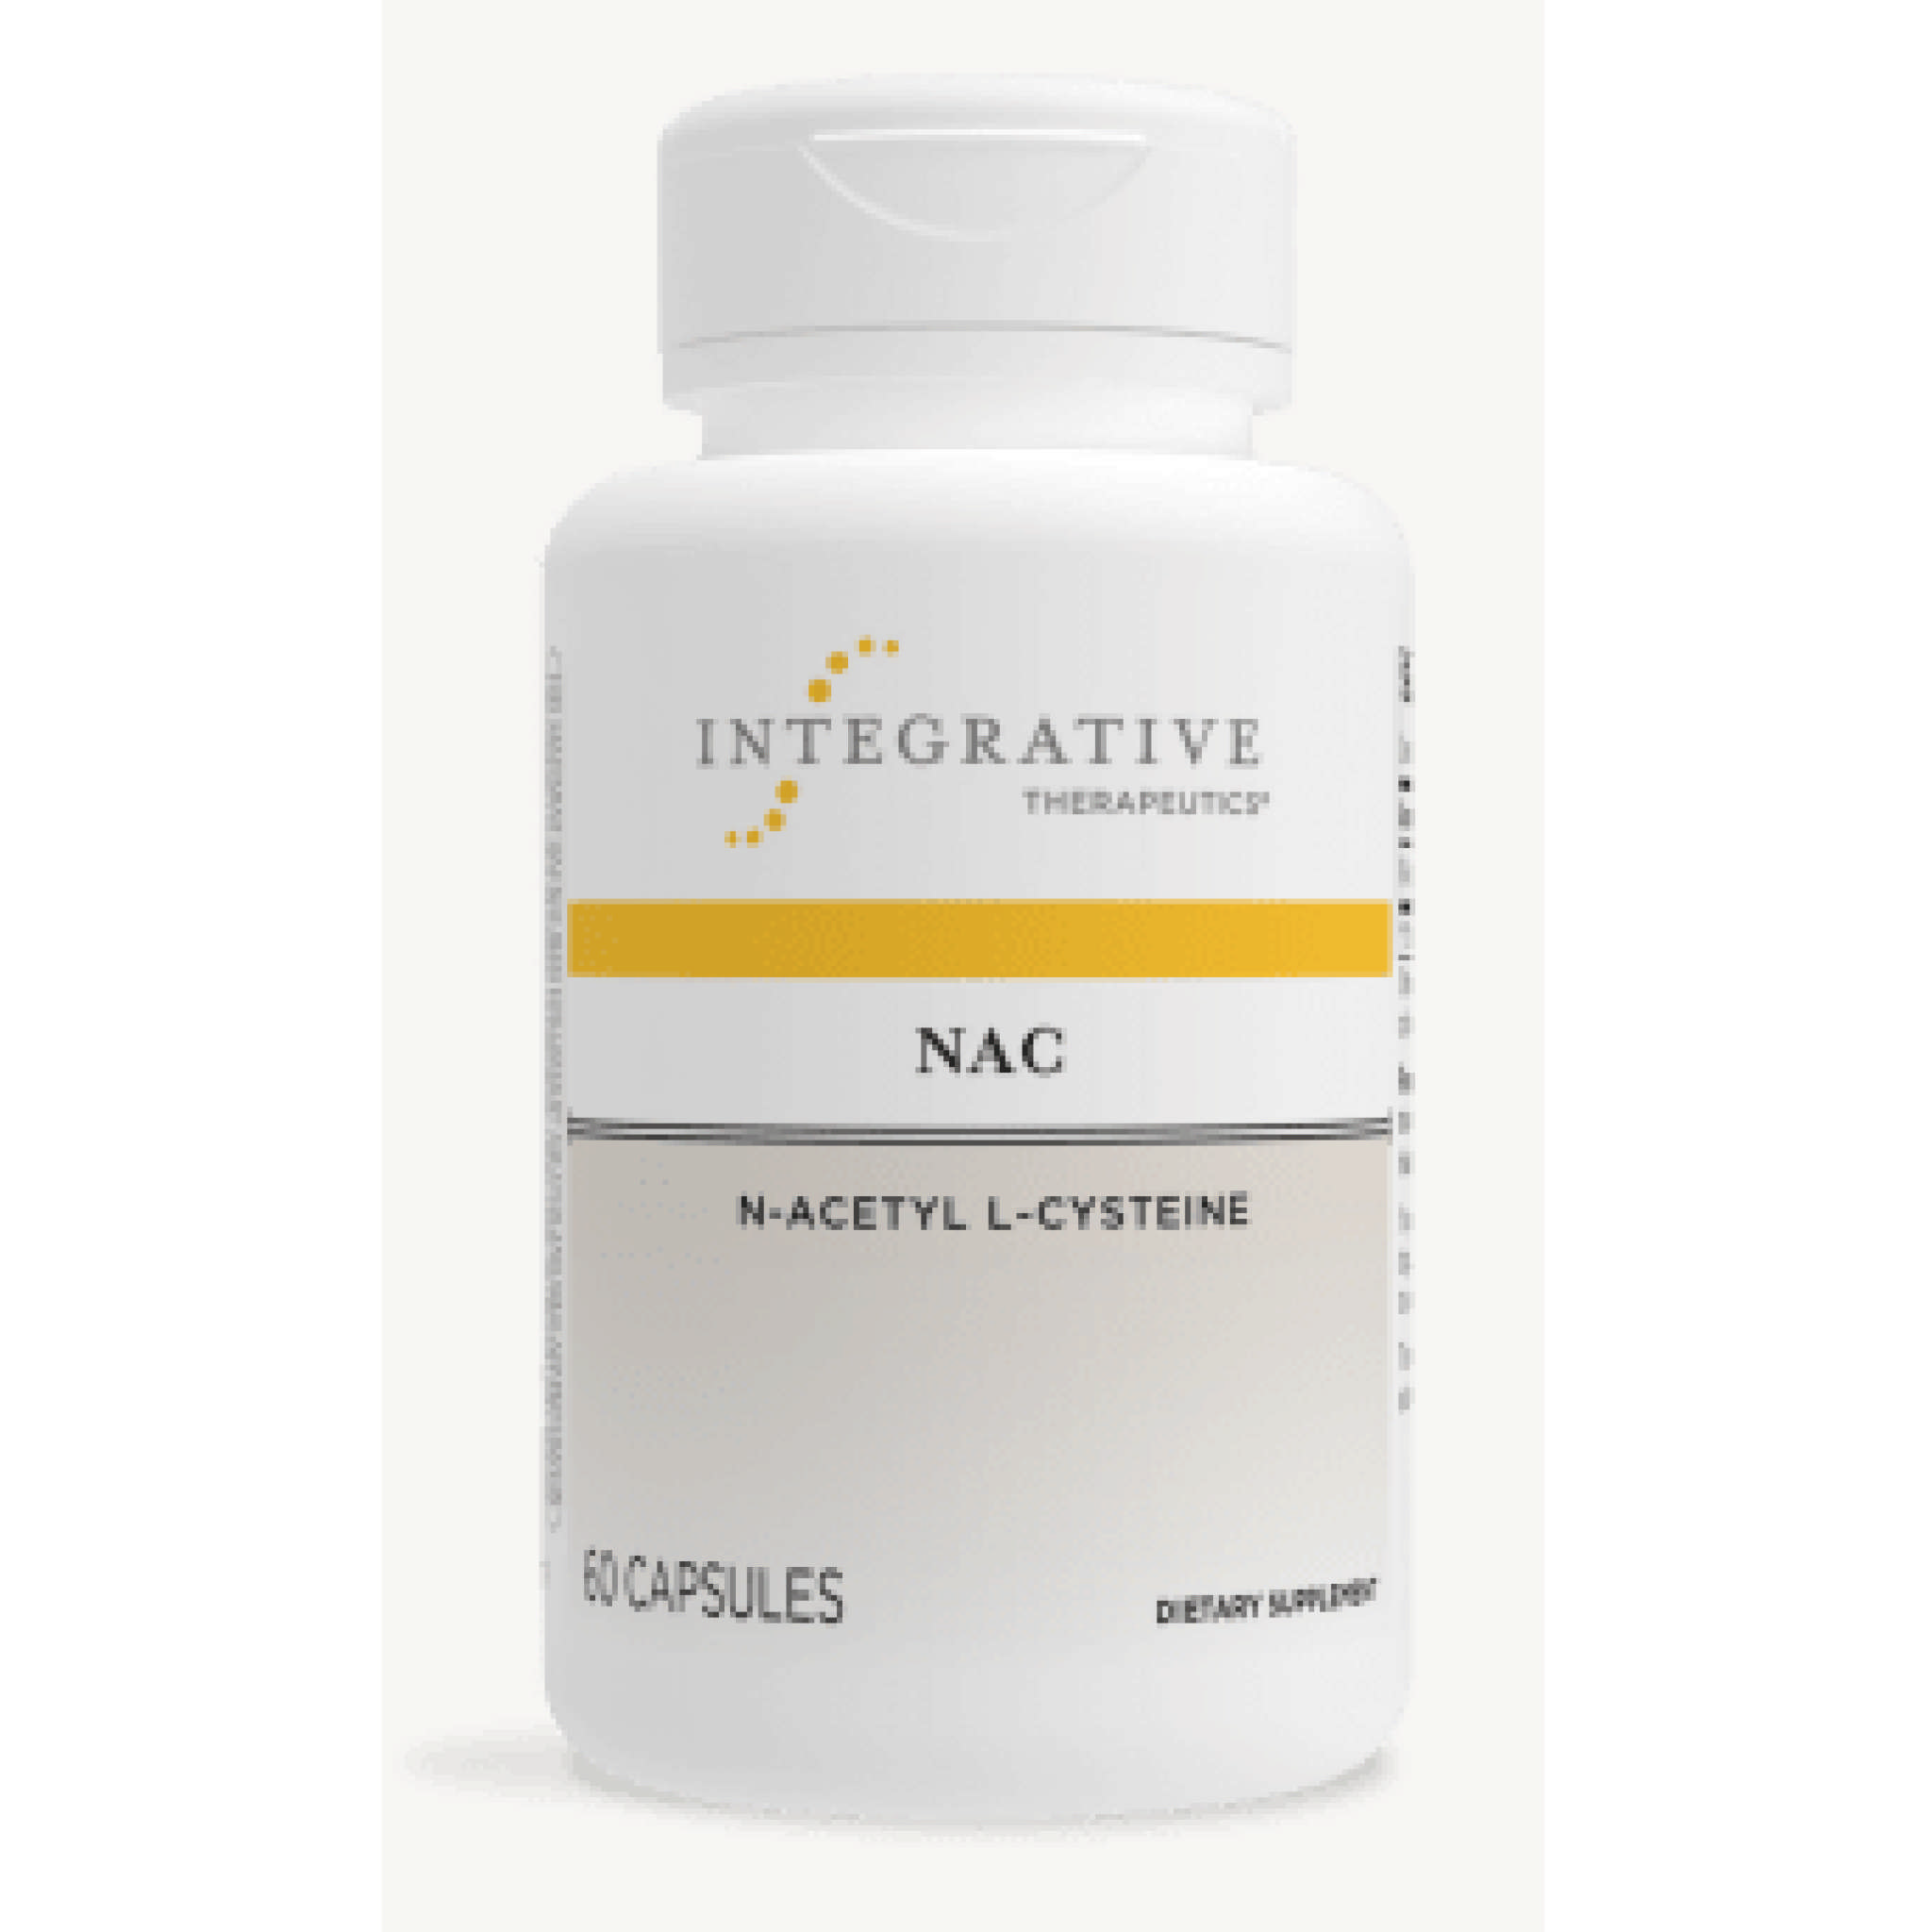 Integrative Therapy - N A C 600 mg